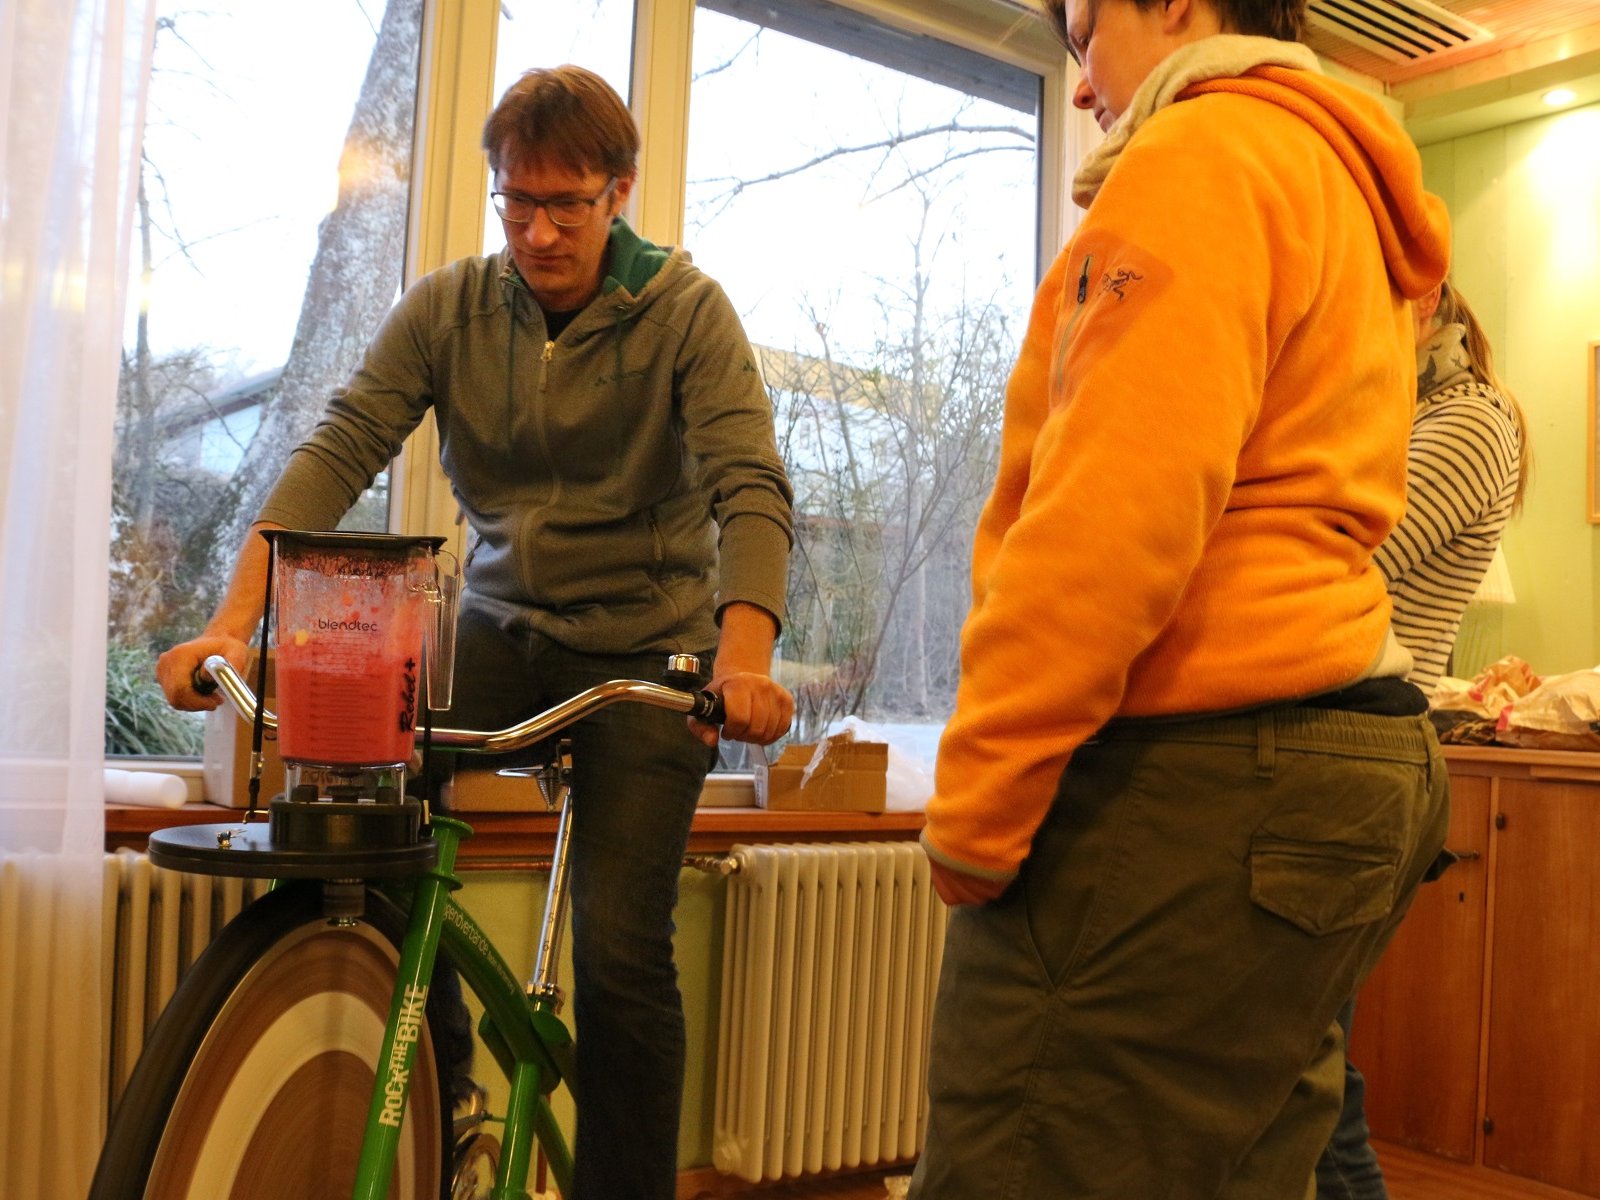 Smoothiebike in Aktion